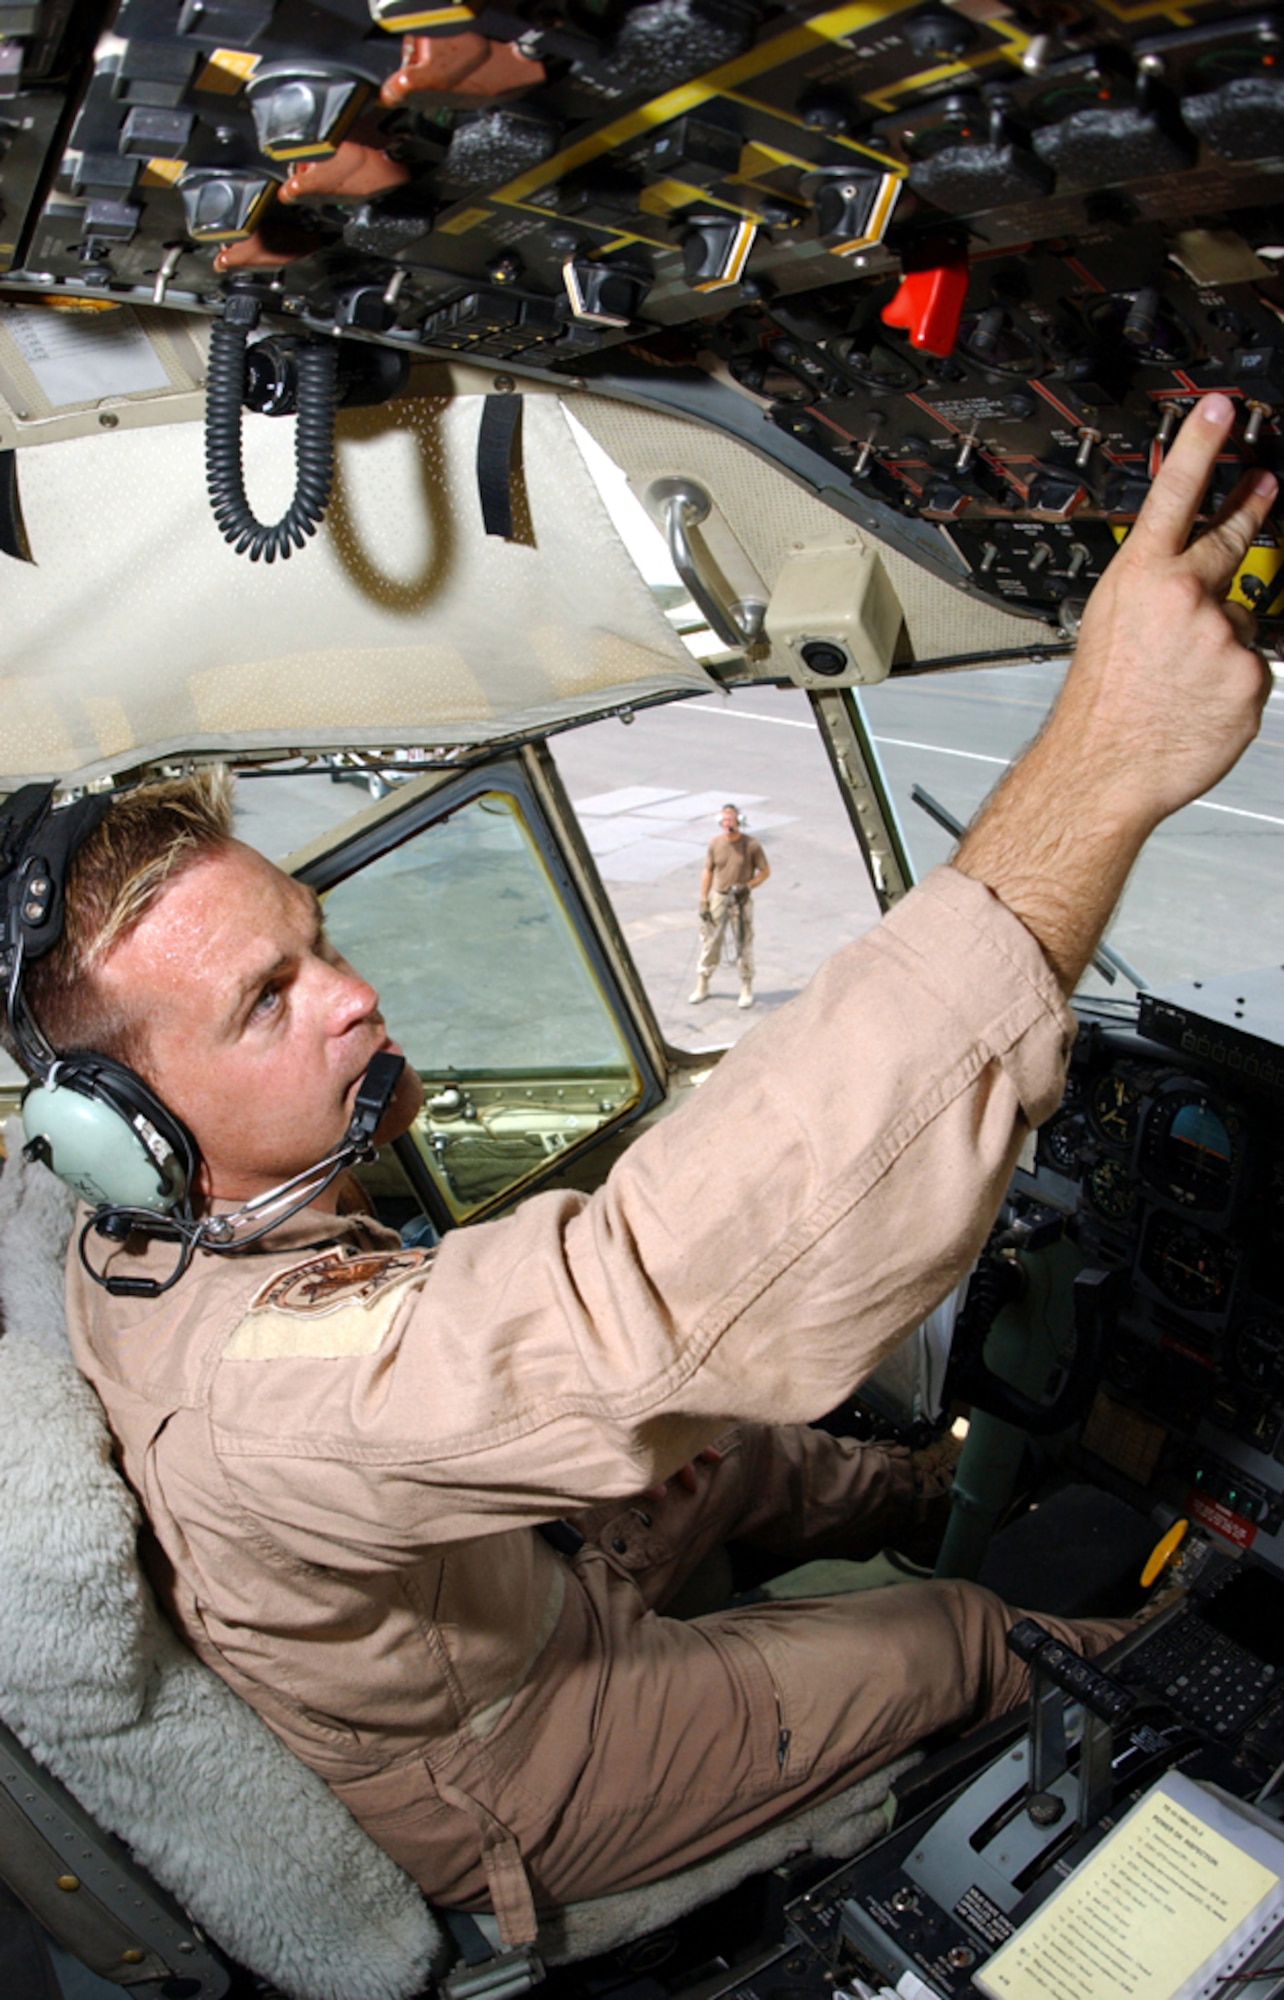 Master Sgts. Tom Rutt (foreground) and Scott Nybakken work in unison at a forward-deployed location in Southwest Asia ensuring a C-130 Hercules is ready for an airlift mission to Iraq on July 8, 2003. Rutt, a flight engineer, and Nybakken, a crew chief, are both assigned to the Delaware Air National Guard’s 166th Airlift Wing. (U.S. Air Force photo by Master Sgt. Terry L. Blevins)